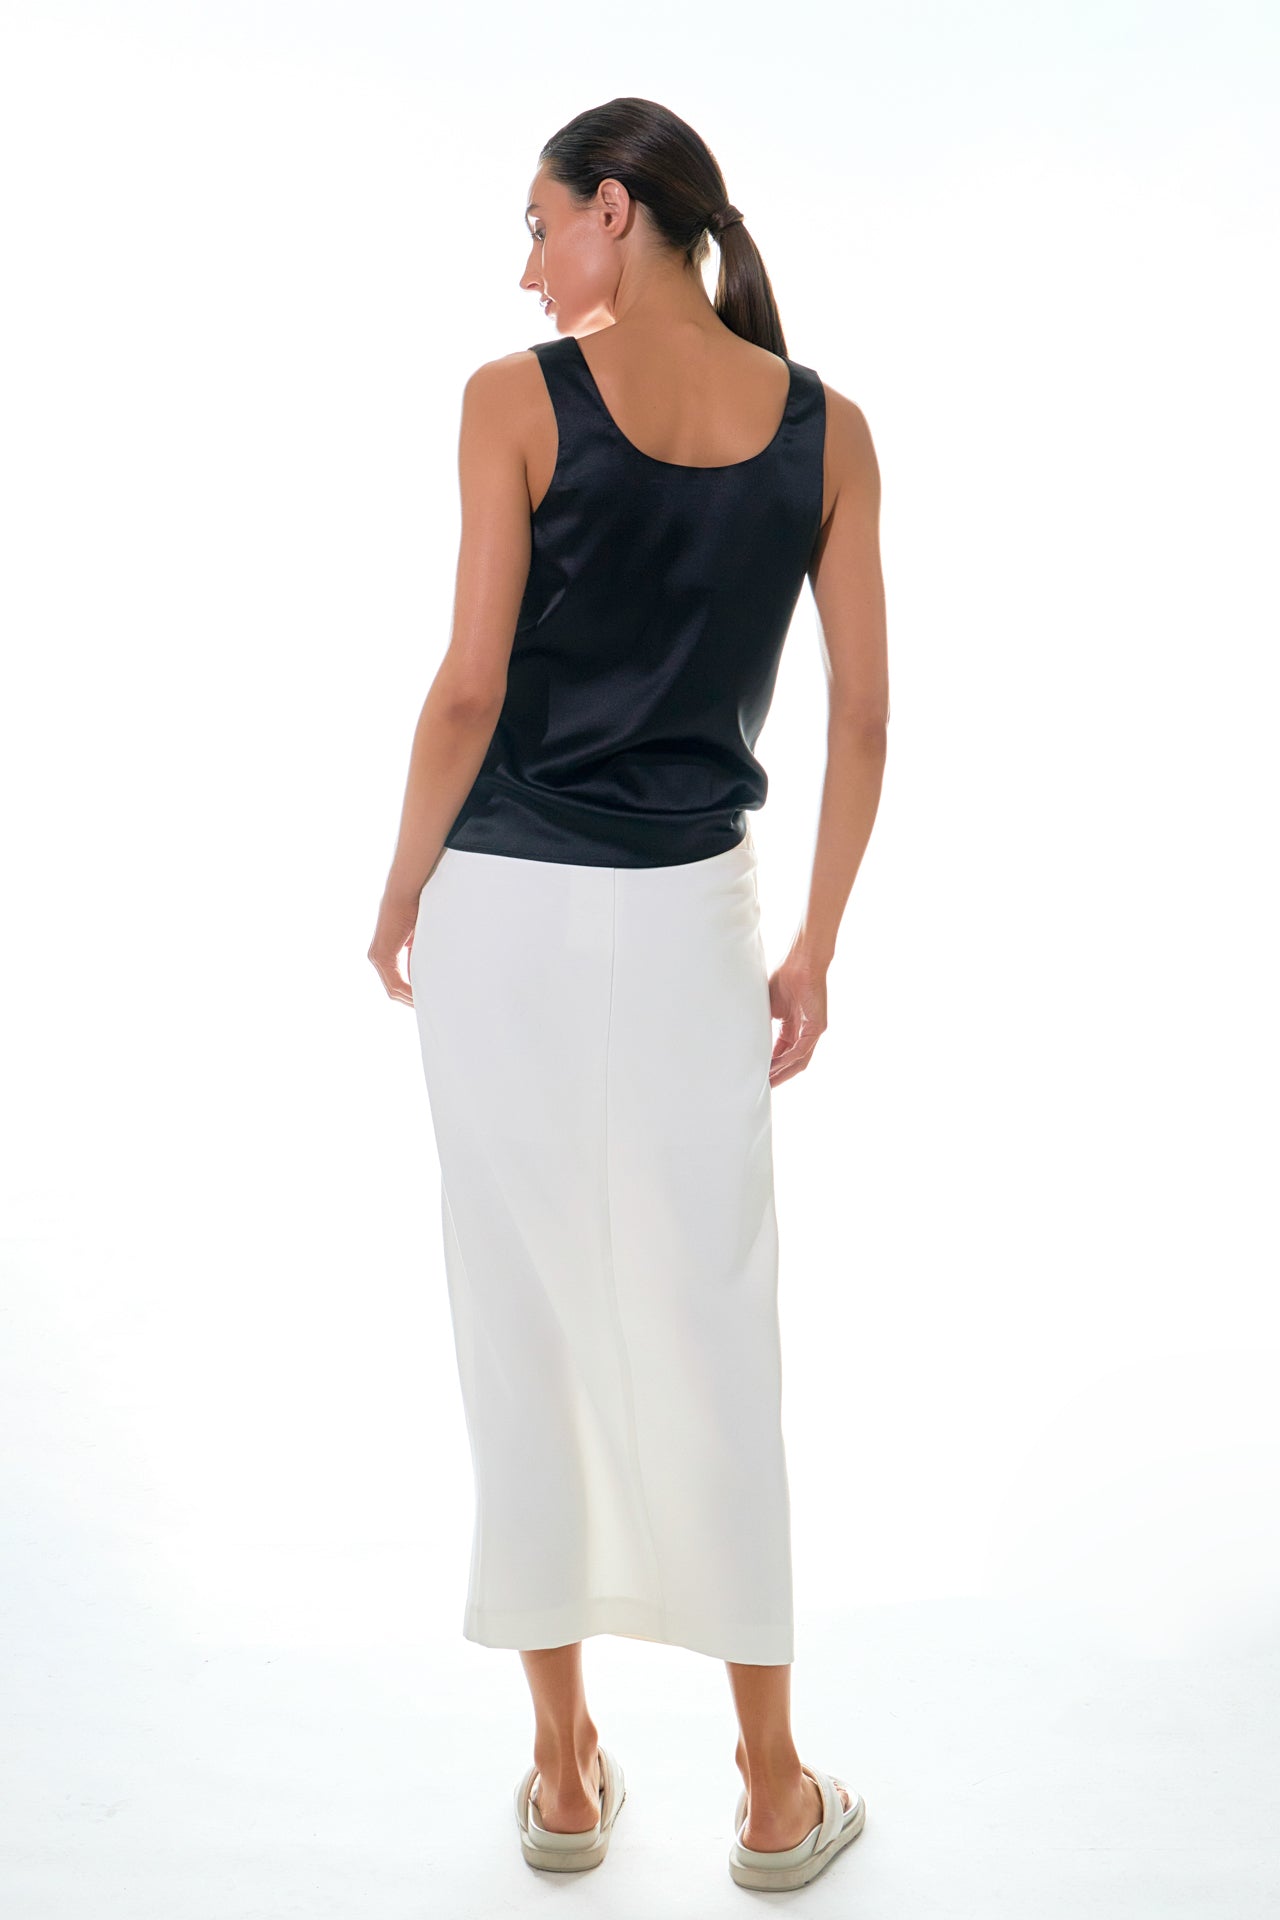 GREY LAB - Mid-Waisted Front Slit Maxi Skirt - SKIRTS available at Objectrare